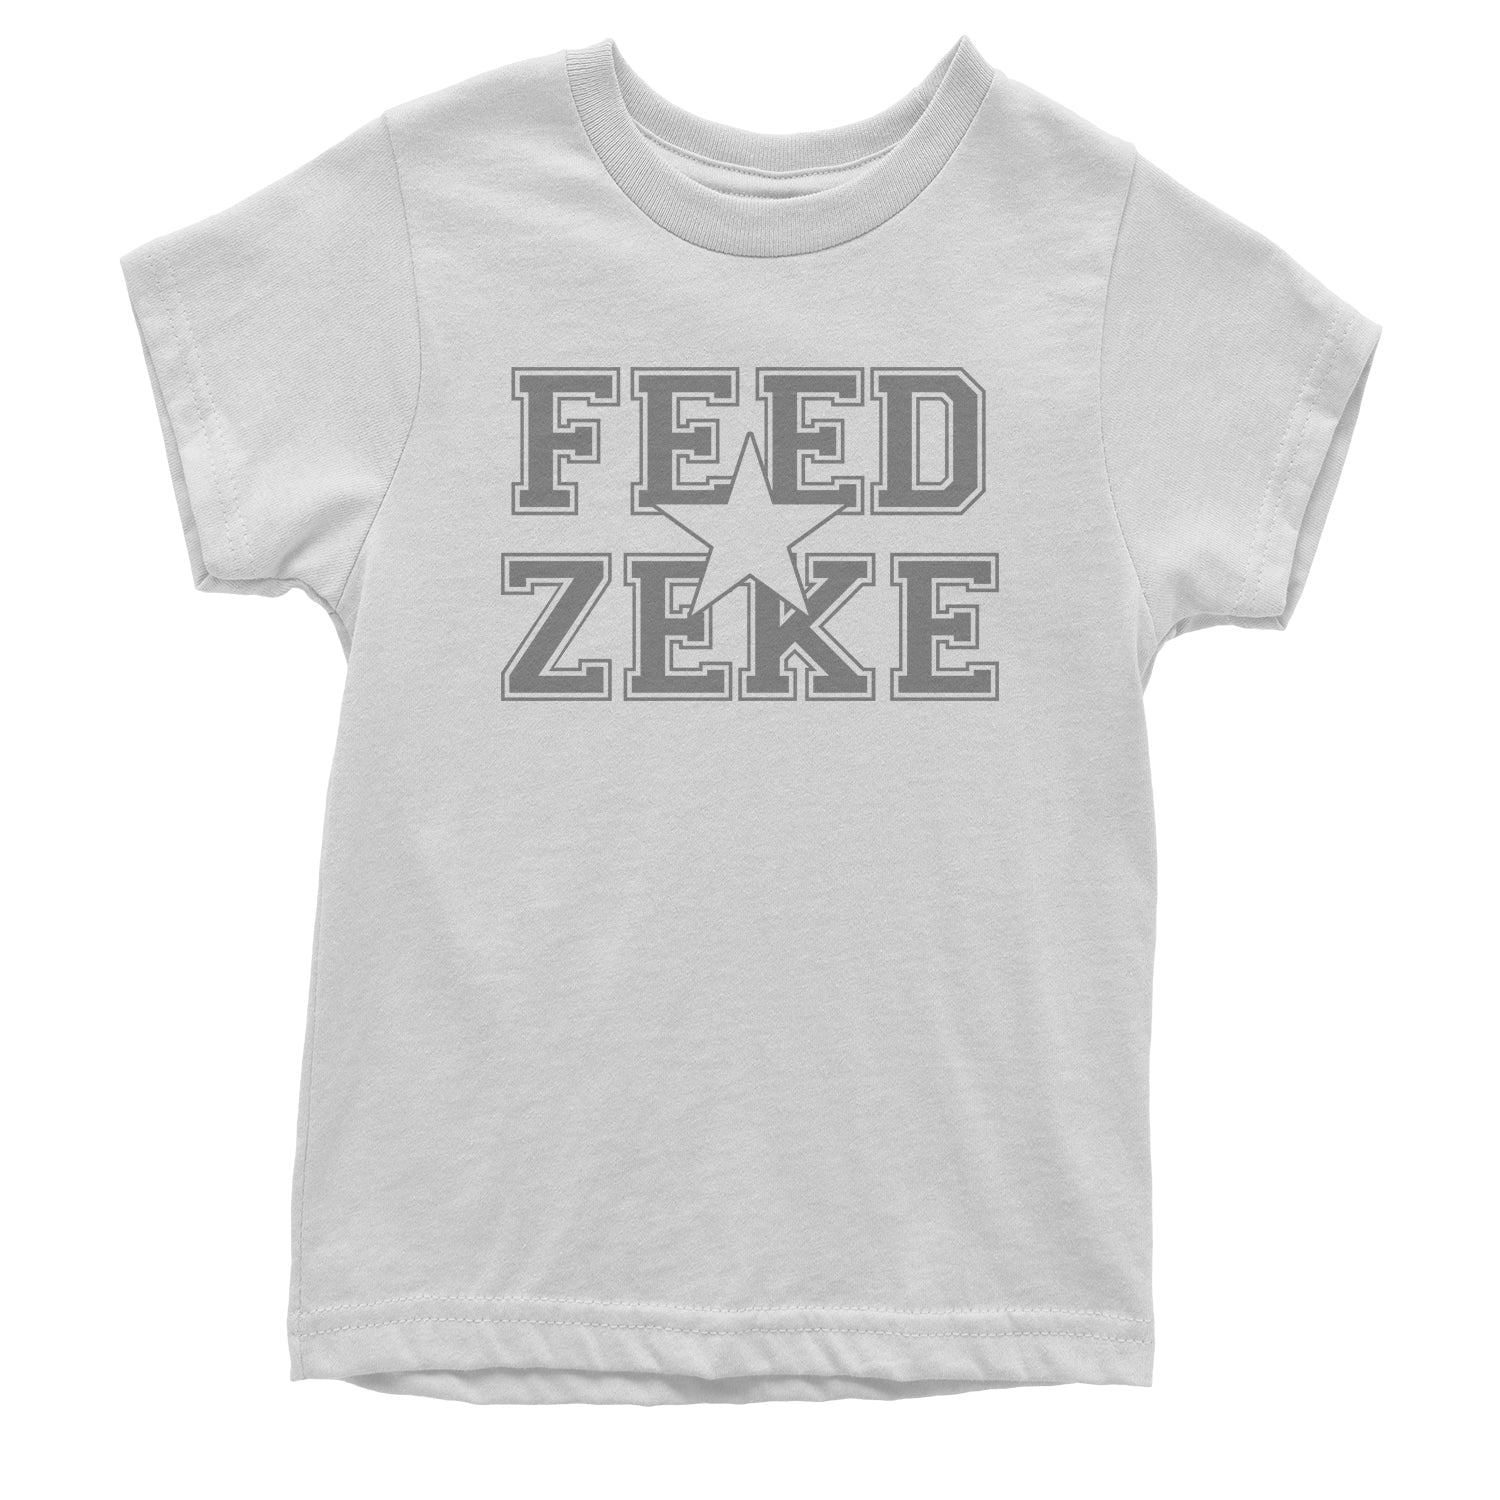 Feed Zeke Youth T-shirt #expressiontees by Expression Tees